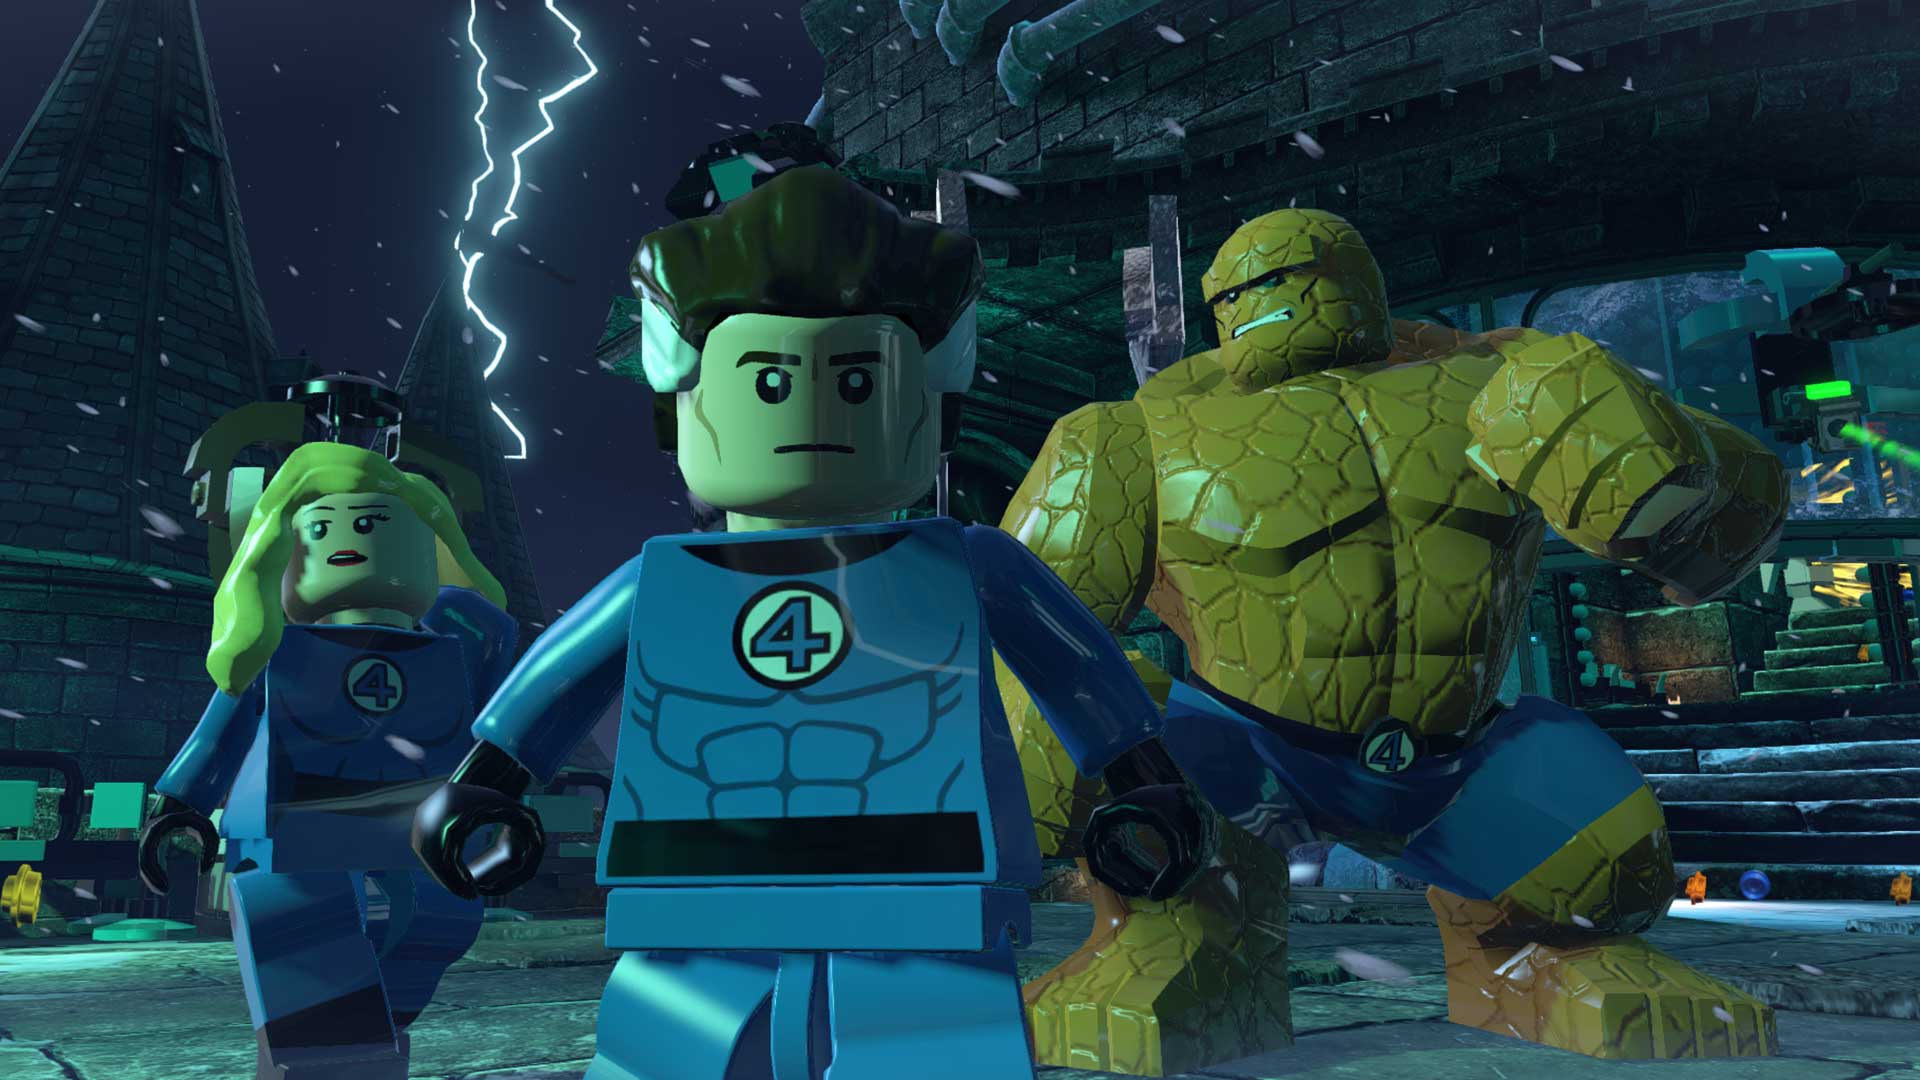 LEGO Marvel Collection (PS4) 